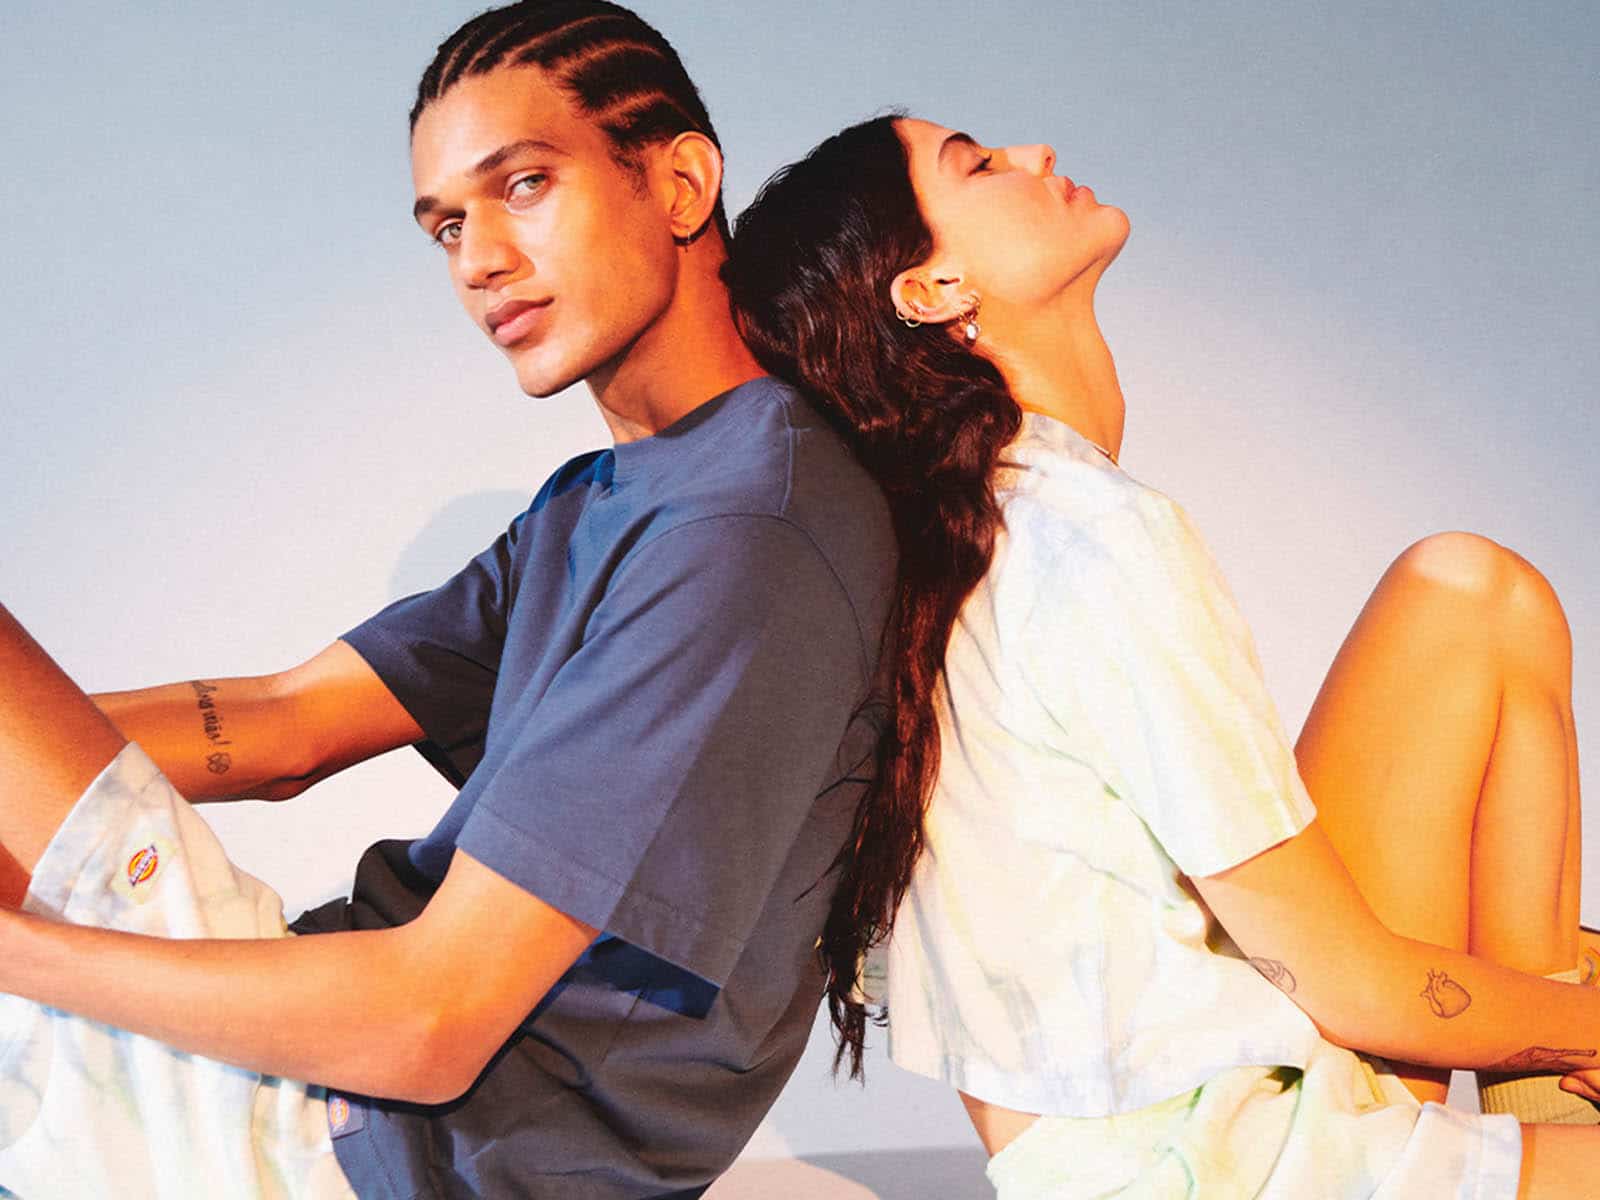 Dickies launches kaleidoscopic “Summer Daze” collection